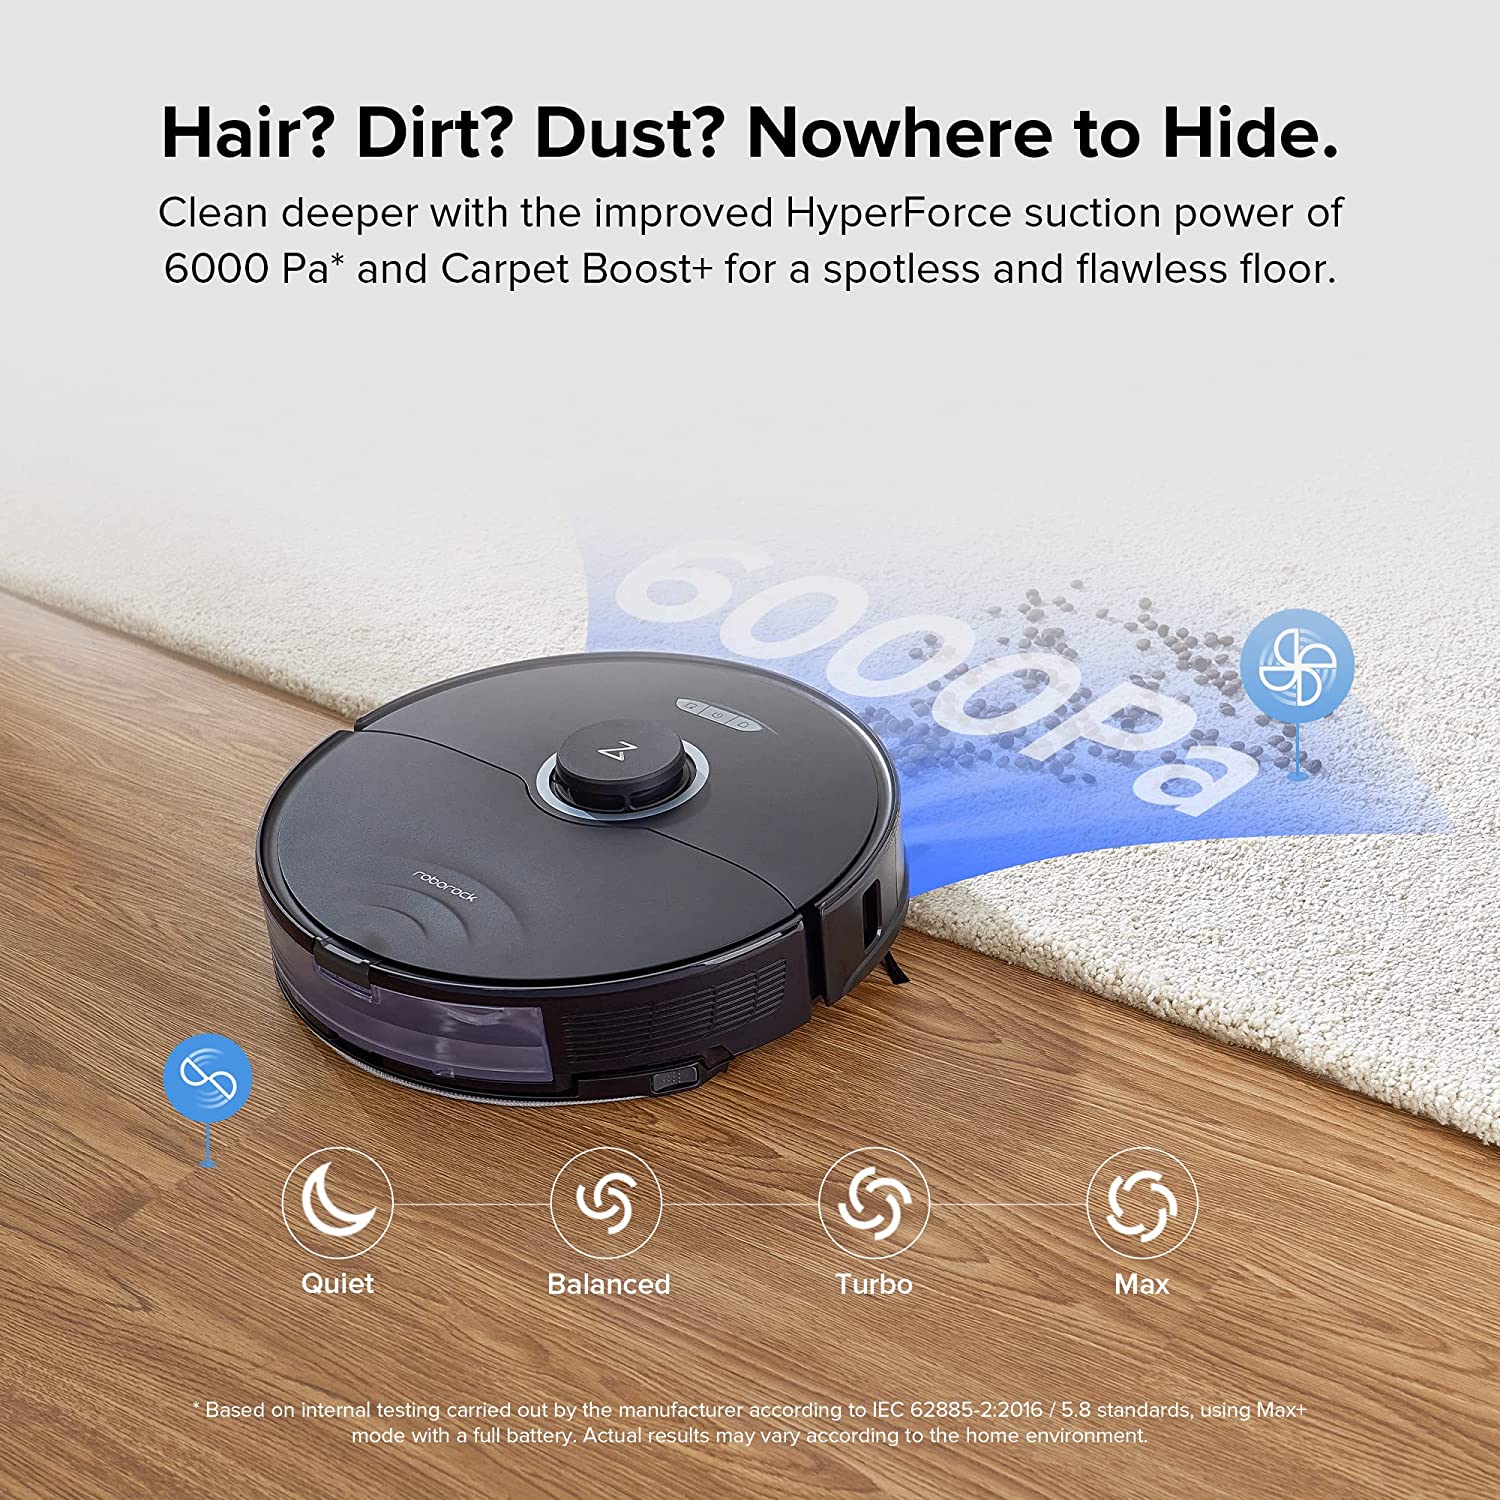 Roborock S8 Robot Vacuum and Mop Cleaner, DuoRoller Brush, 6000Pa Suction, ReactiveAI 2.0 Obstacle Avoidance, Sonic Mopping, Auto Lifting Mop, Works with Alexa, Perfect for Pet Hair, White